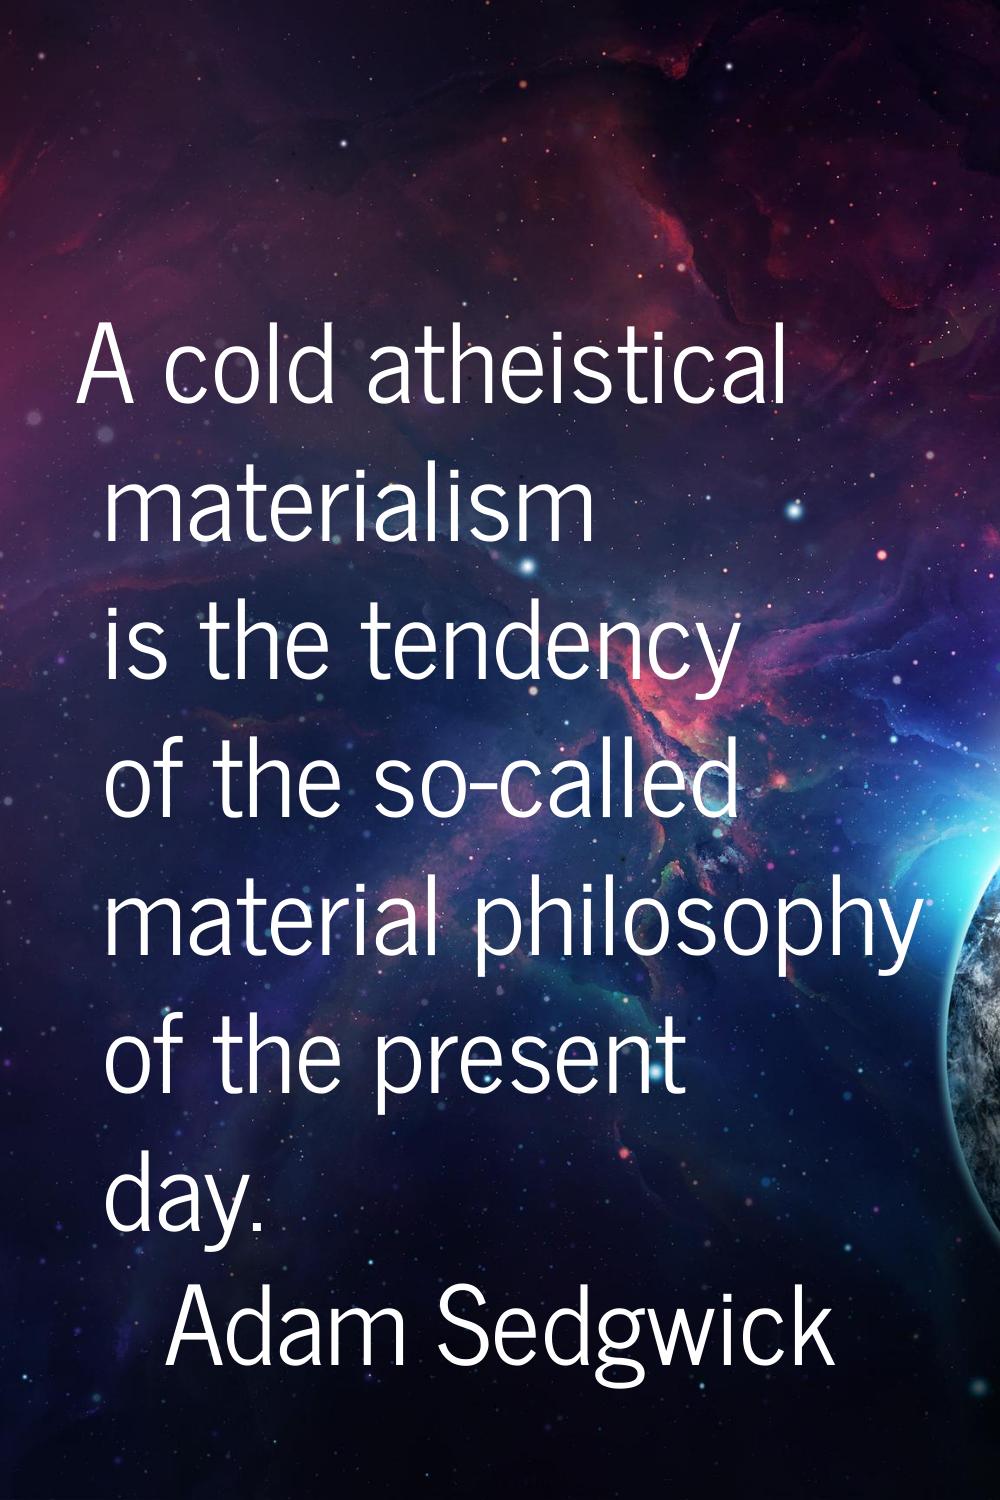 A cold atheistical materialism is the tendency of the so-called material philosophy of the present 